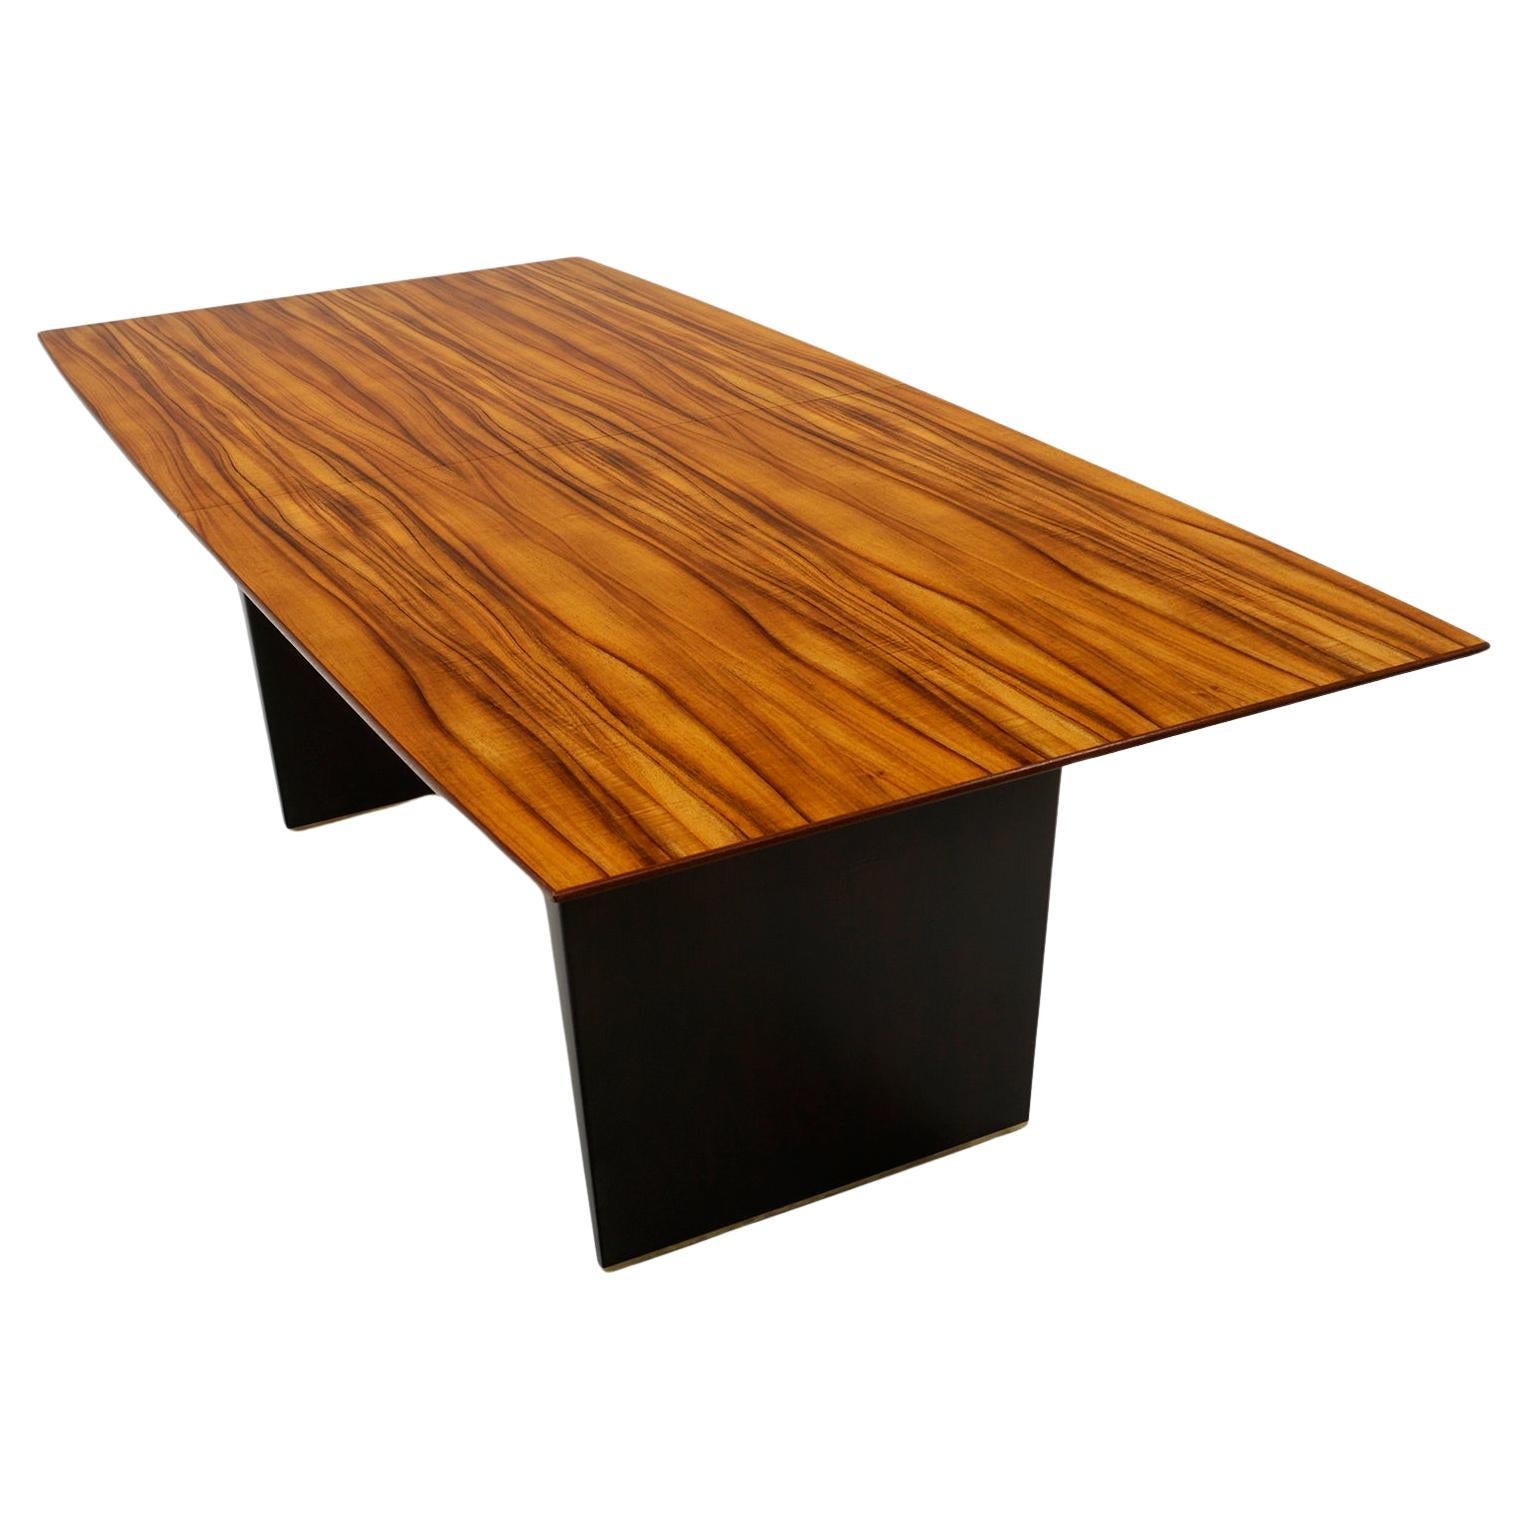 Tawi Wood Dining Table by Edward Wormley for Dunbar. Excellent. SEE THE VIDEO! For Sale